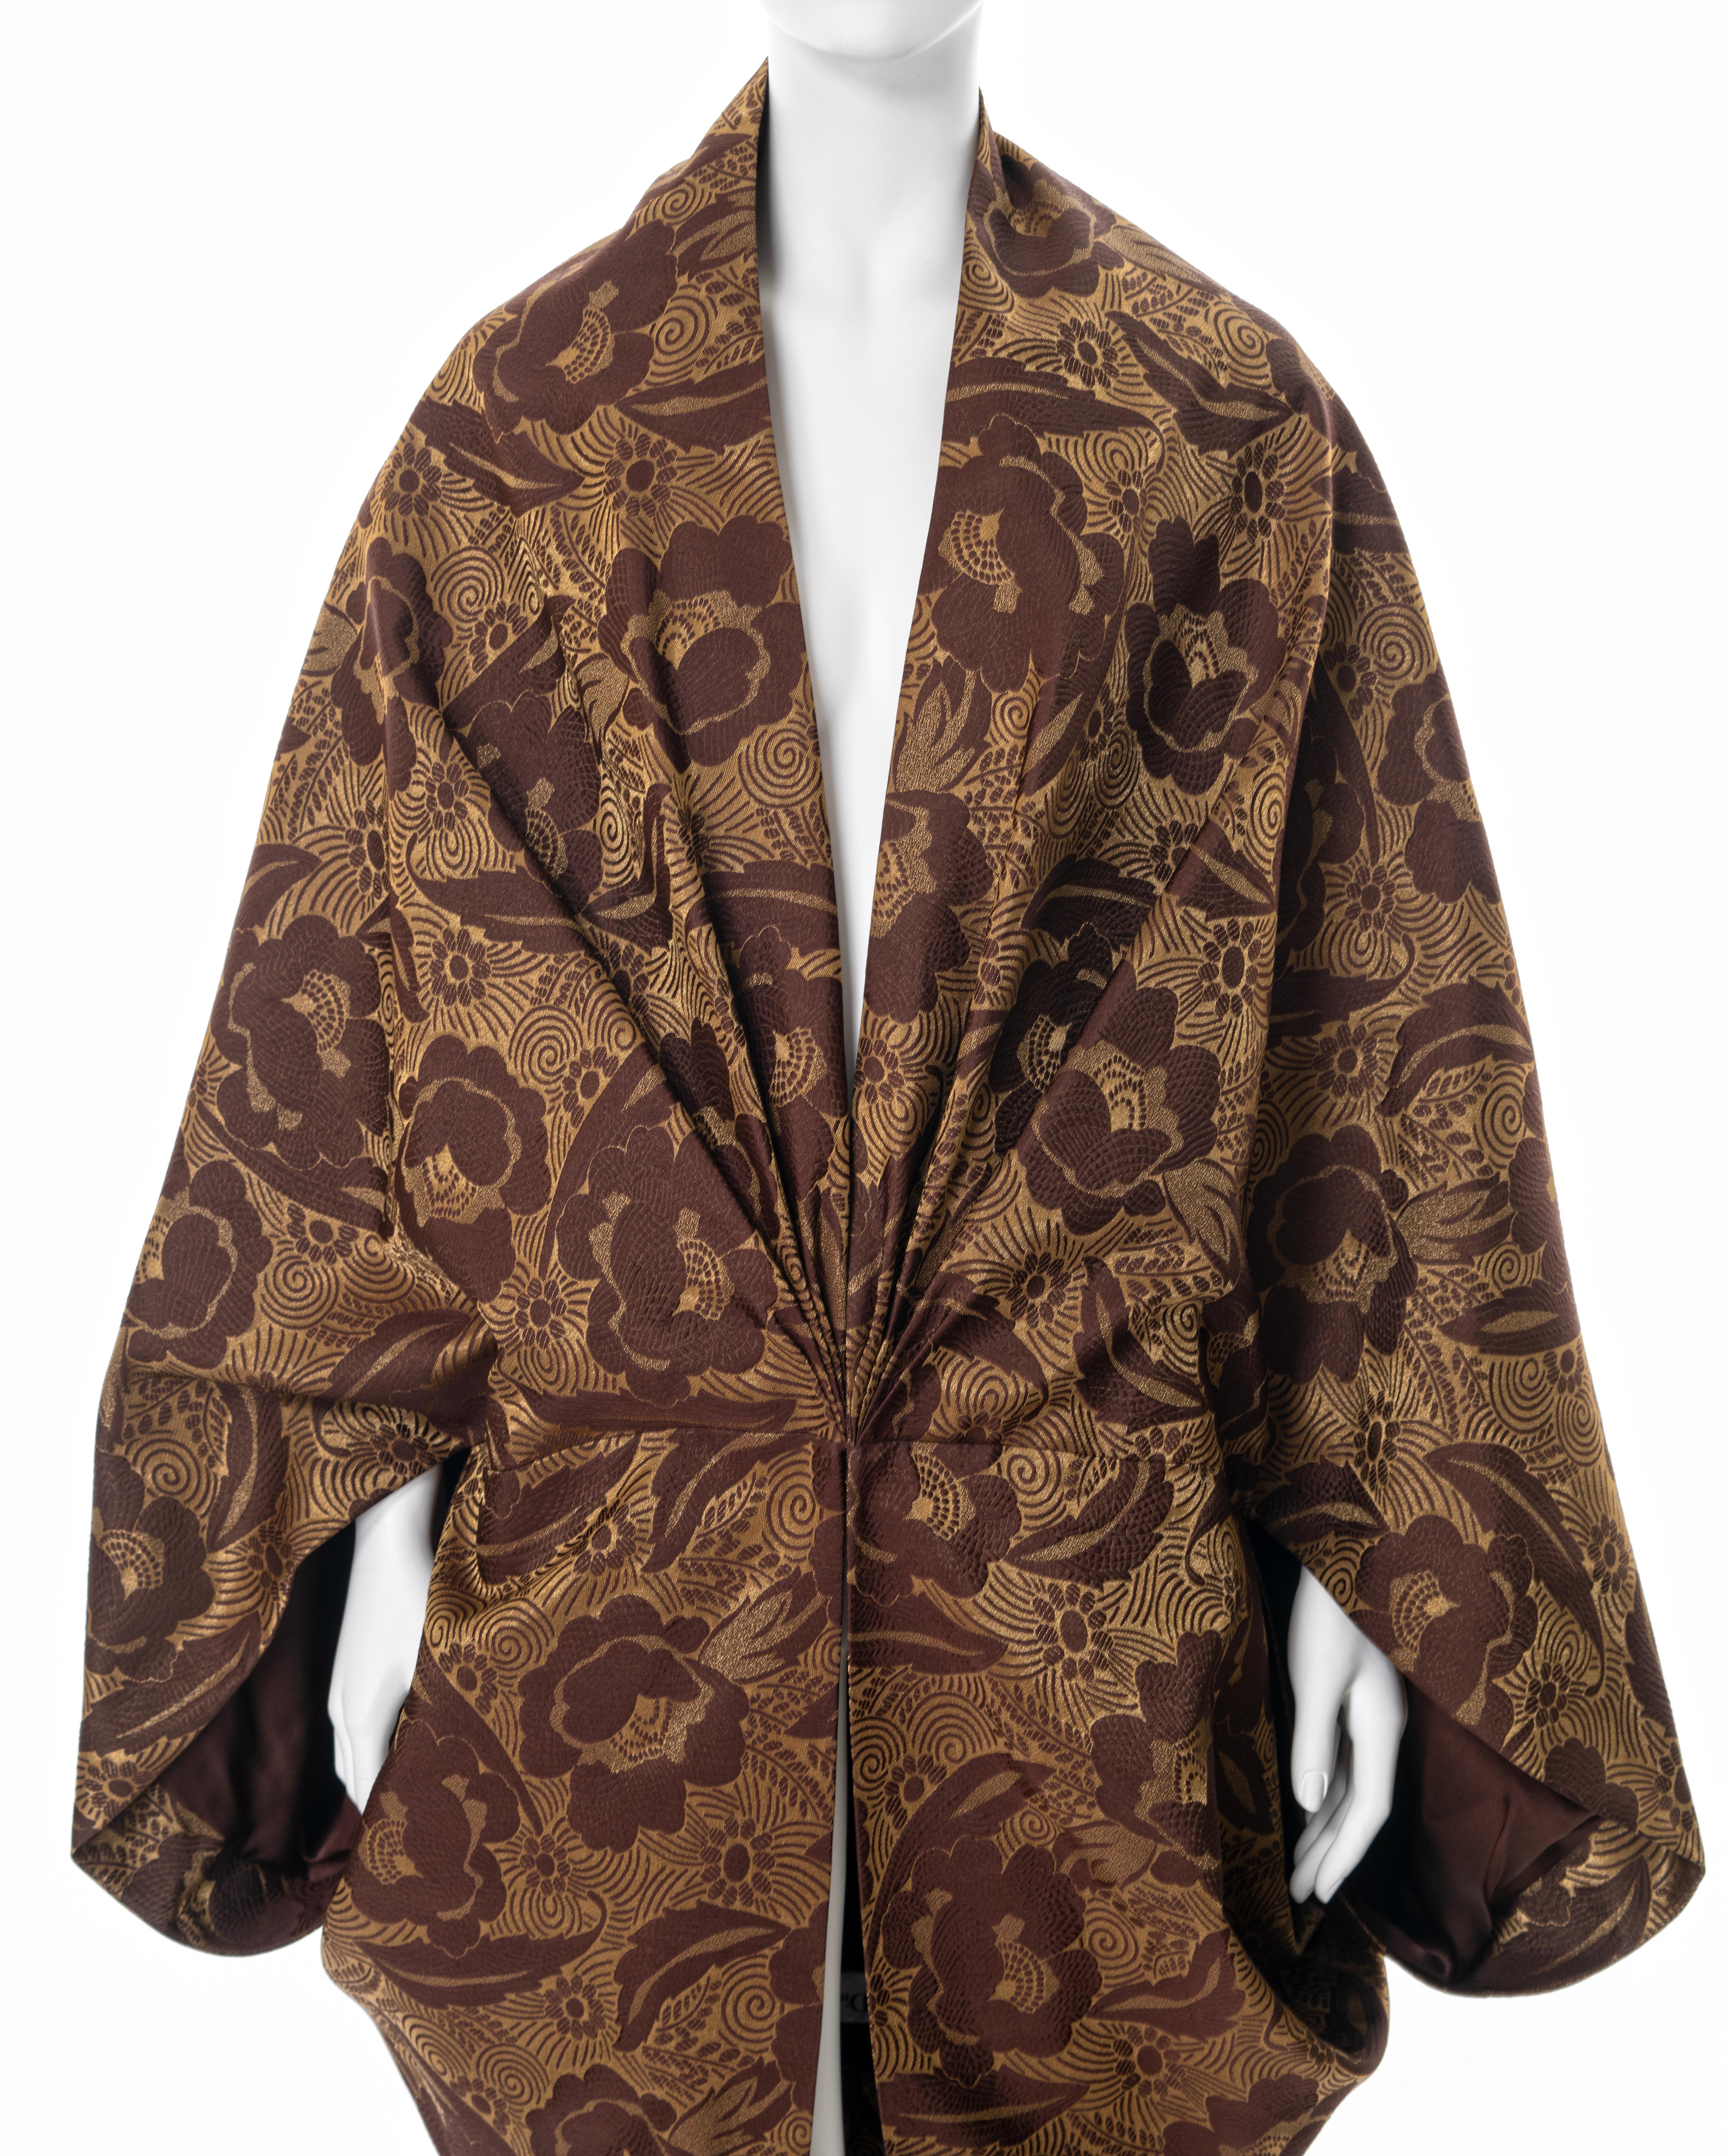 Christian Dior by John Galliano silk cocoon coat with fox fur collar, ss 2008 For Sale 7